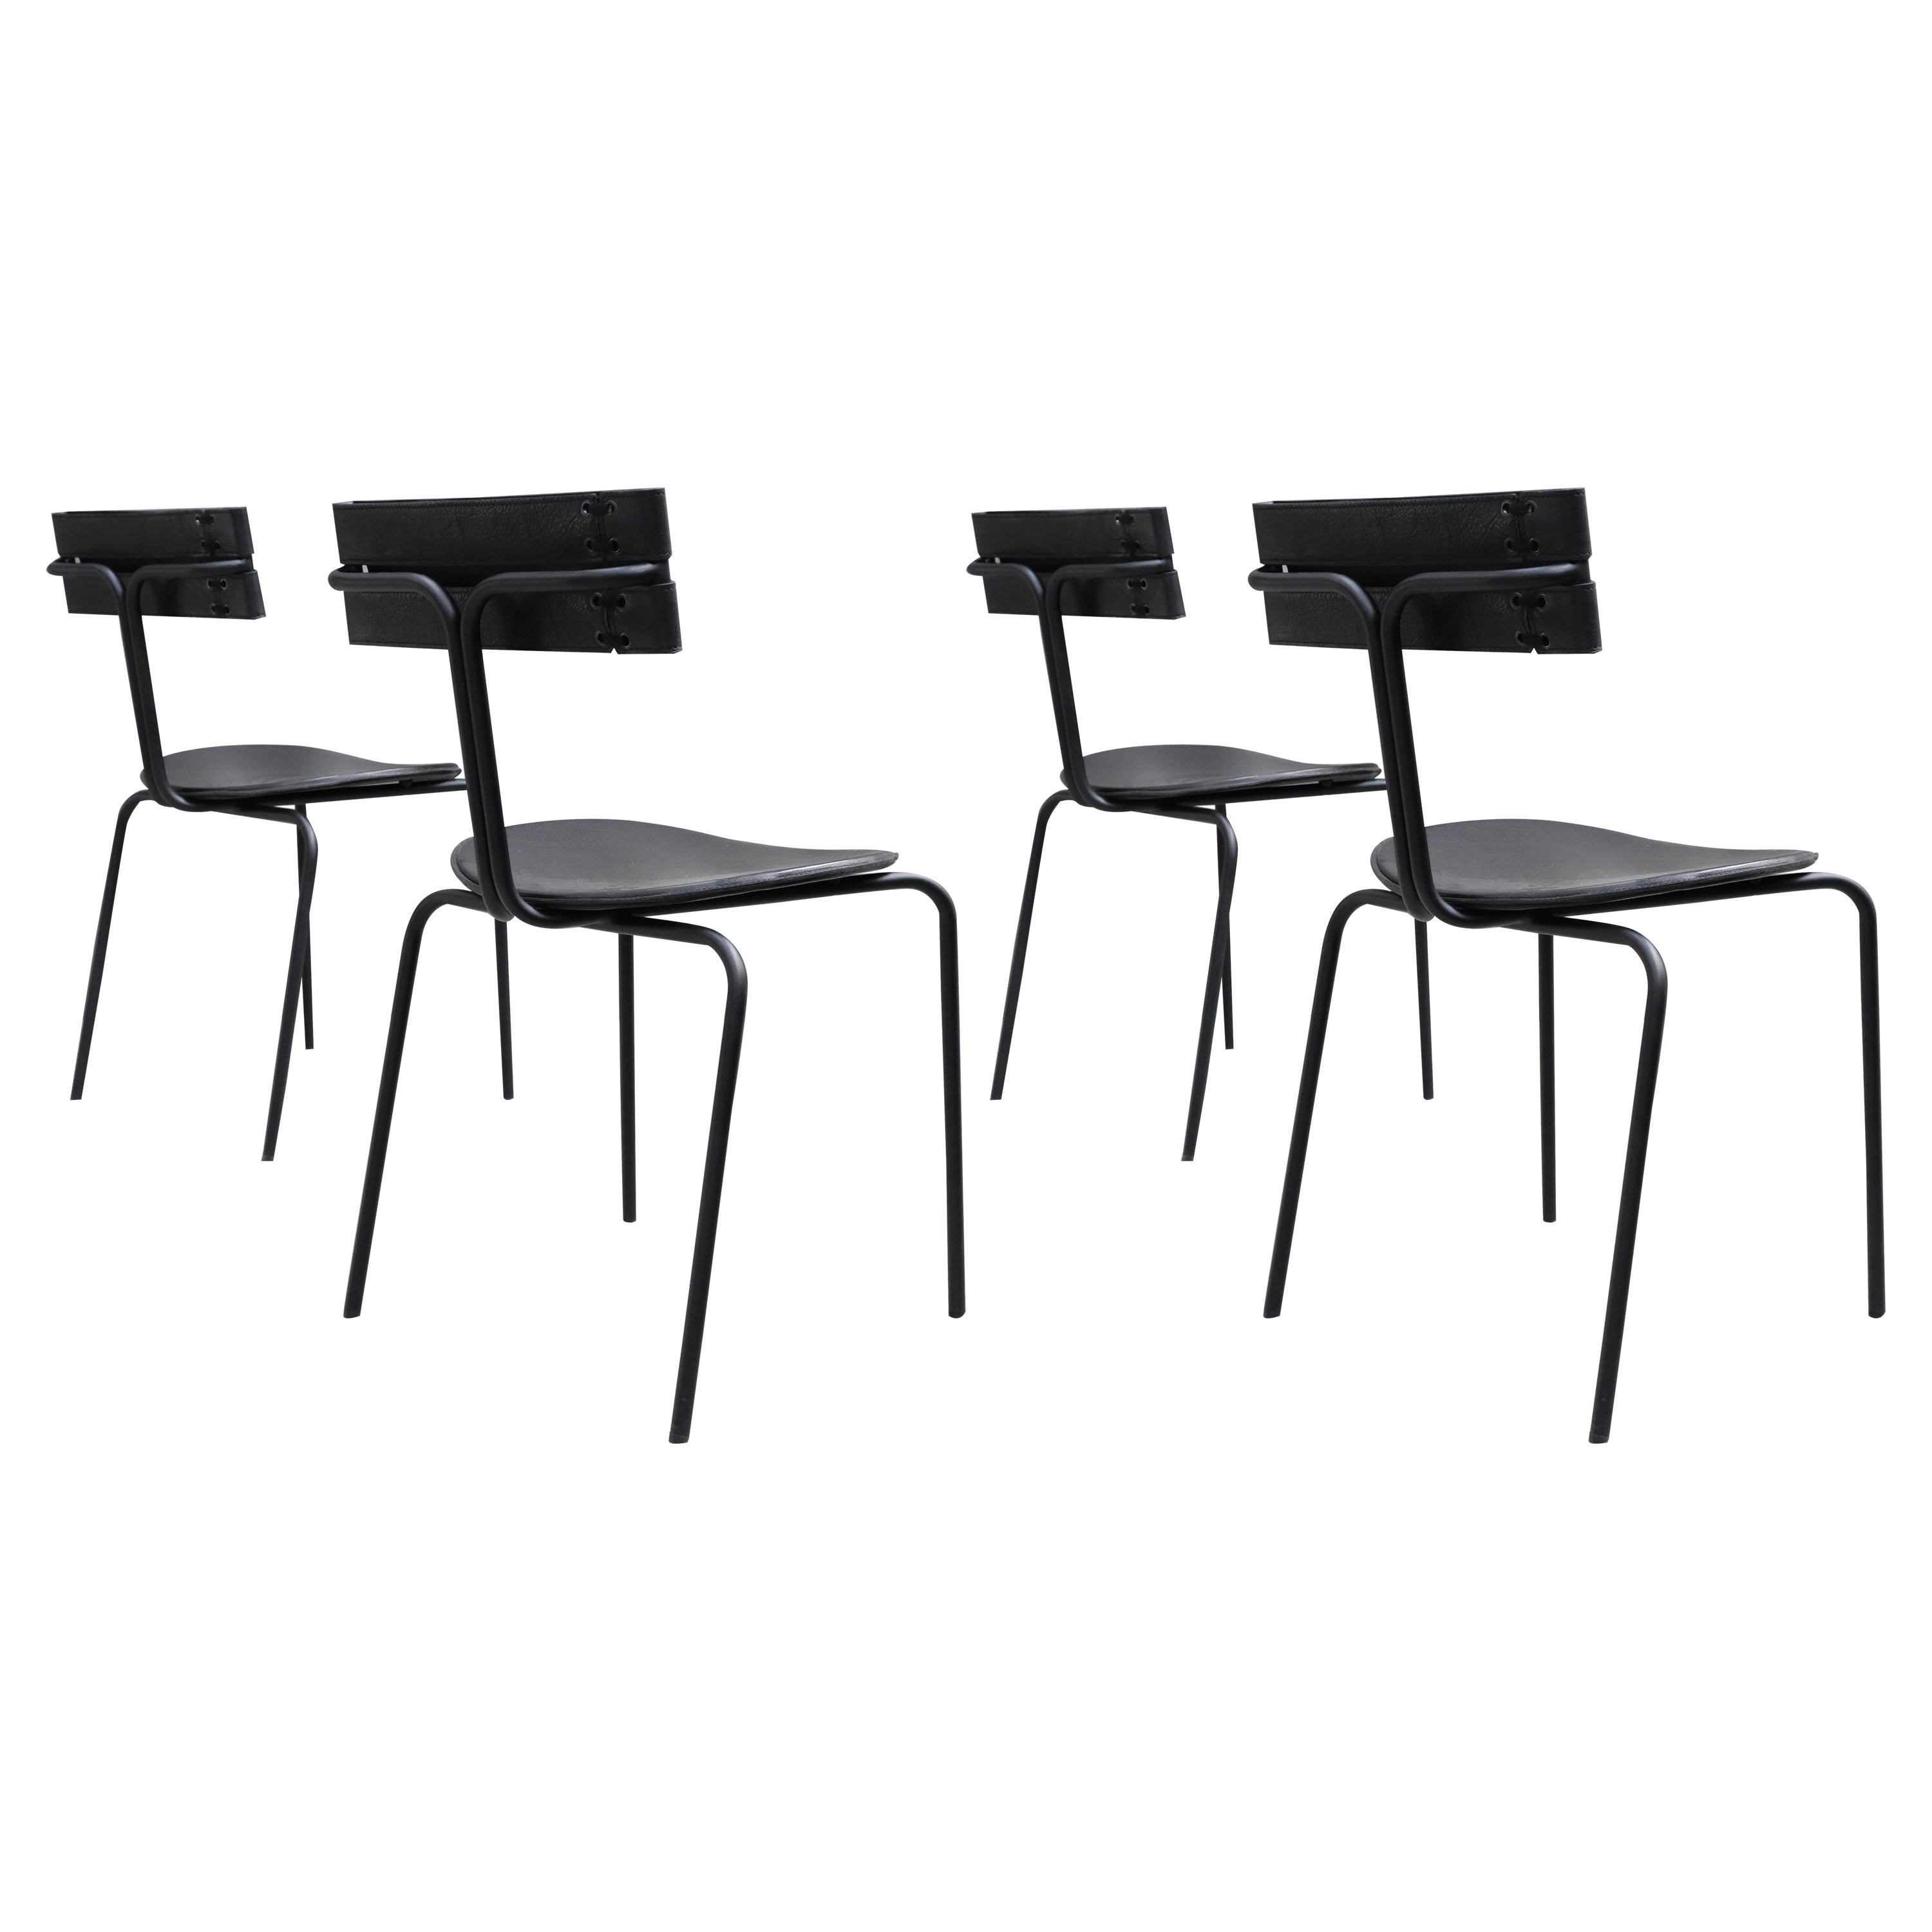 Set of 4 Rendez-Vous Chairs by Part Studio Atelier For Sale